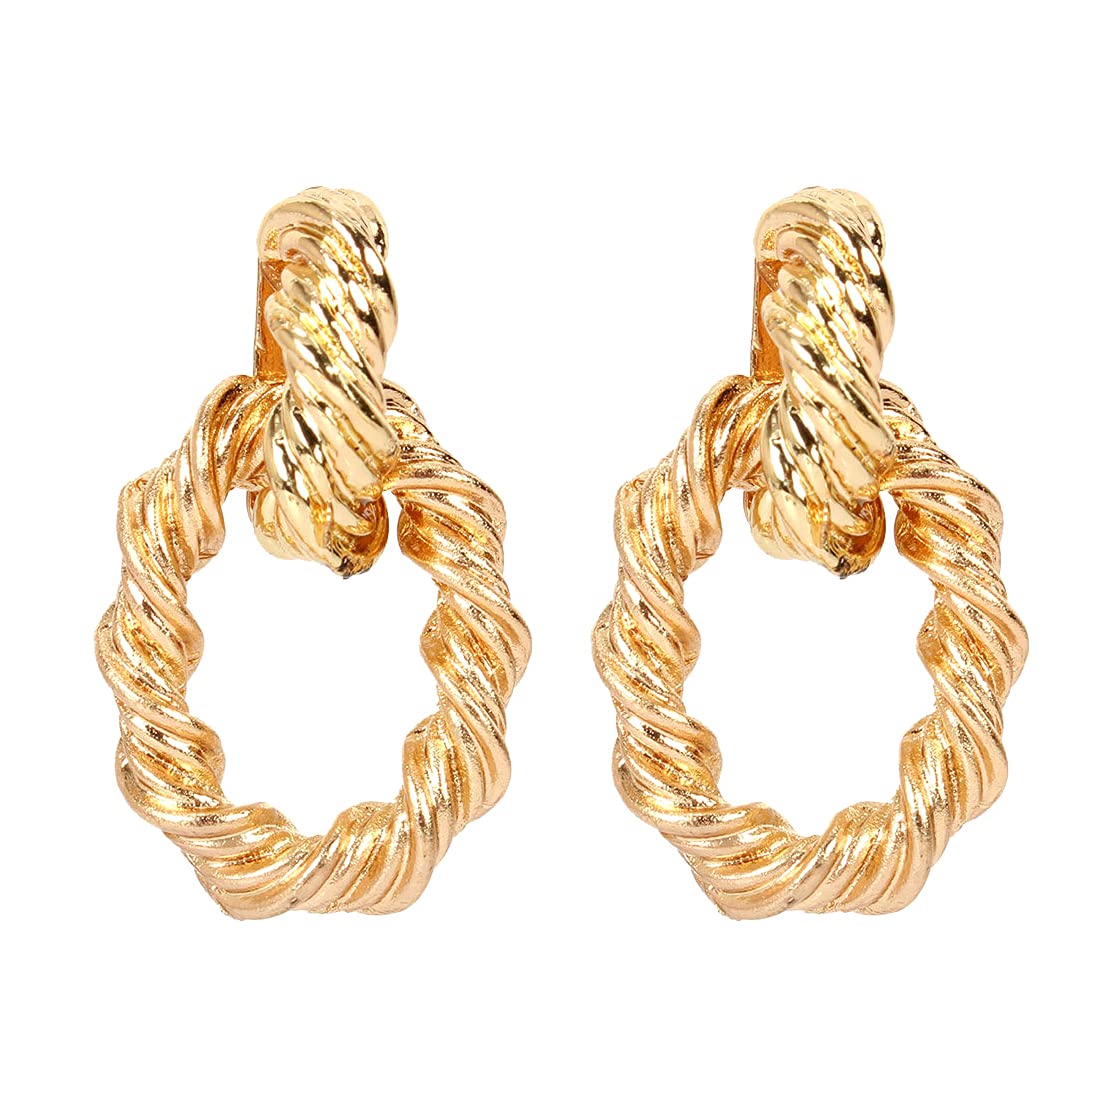 Yellow Chimes Latest Fashion Gold Plated Geometric Design Dangle Earrings for Women and Girls, Medium (YCFJER-10GEOMTRC-GL)